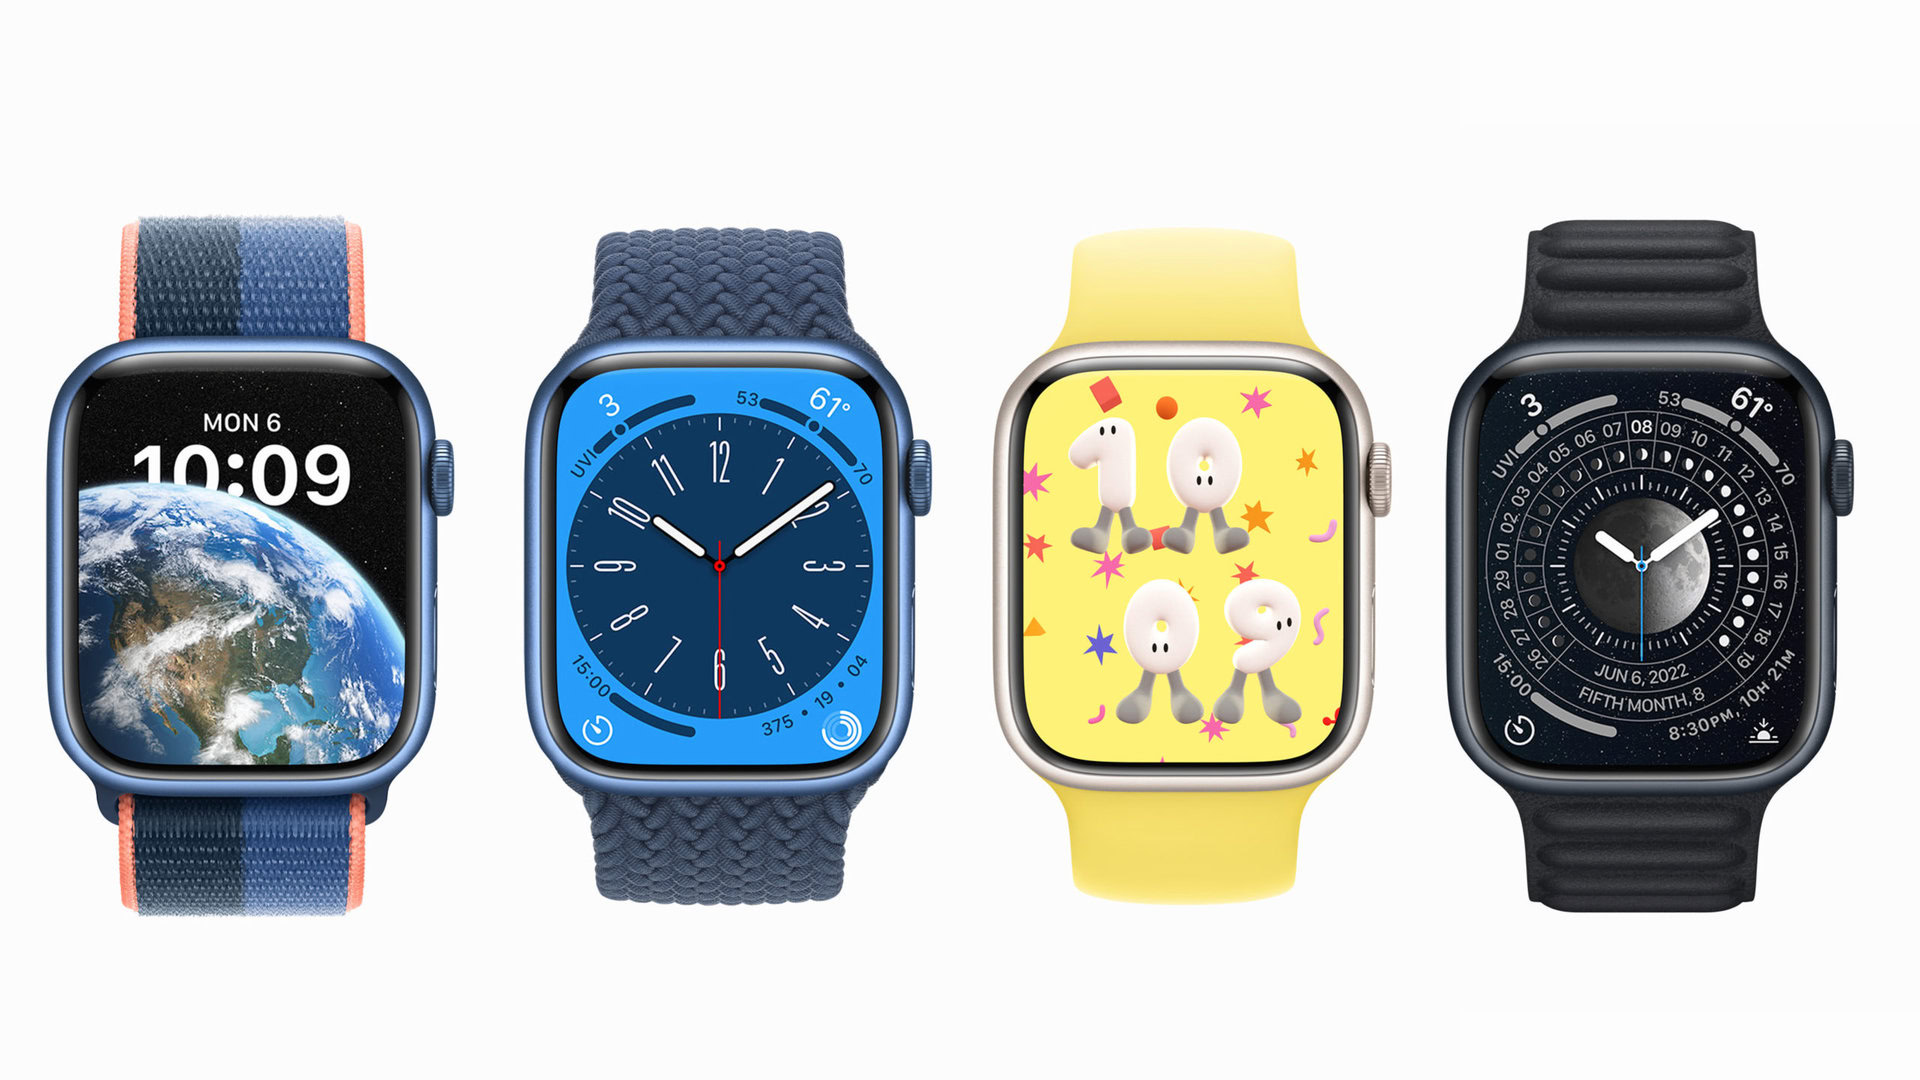 Users will be introduced to four new watch faces when watchOS 9 launches this fall.